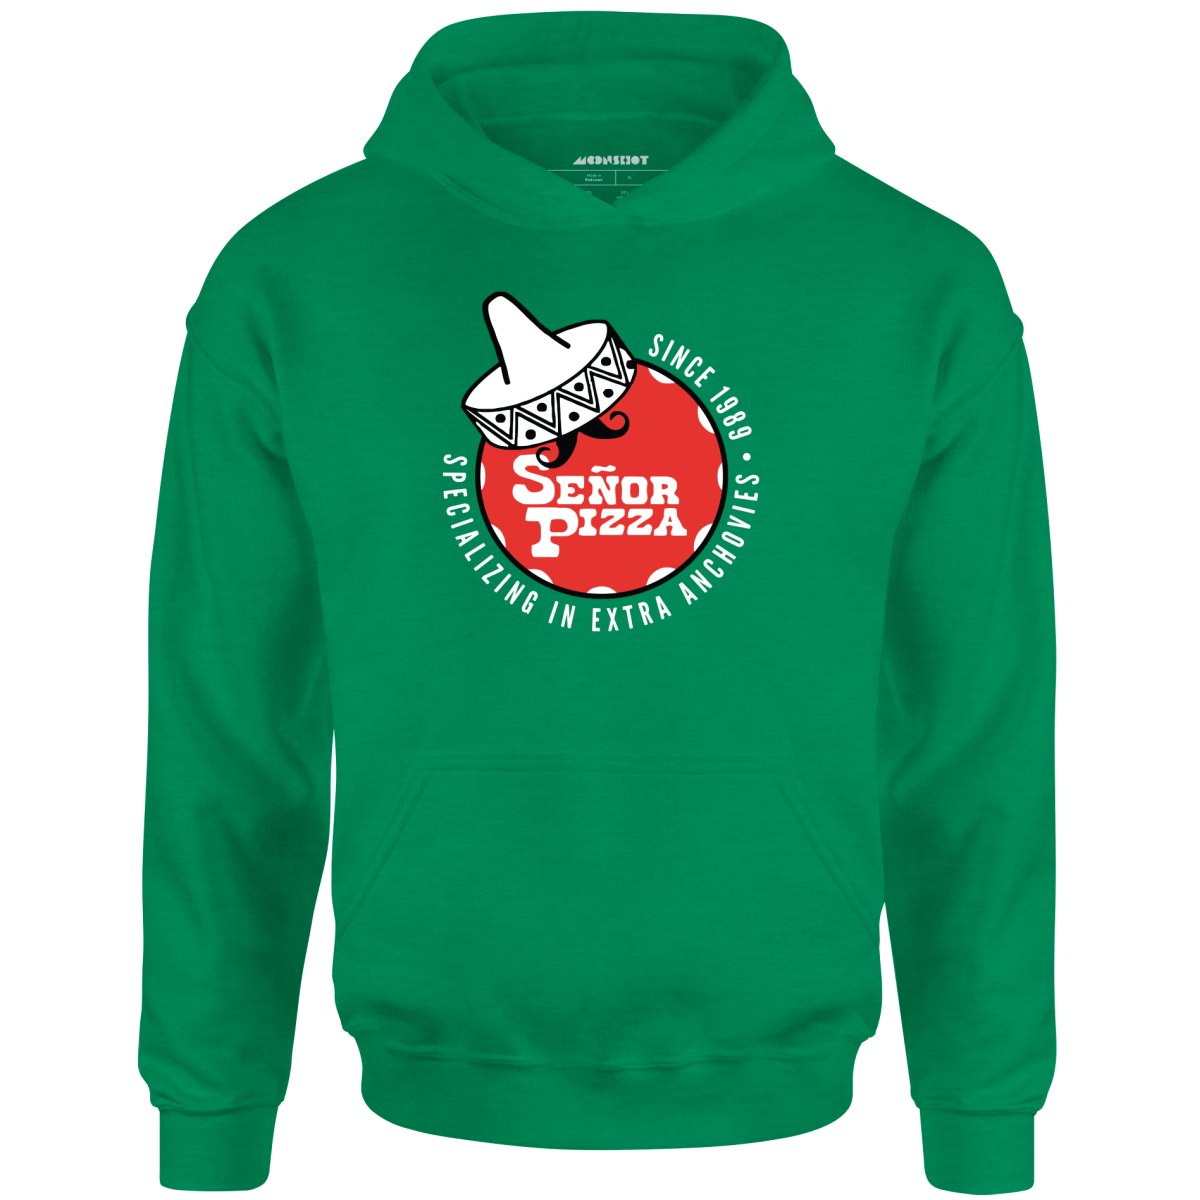 Señor Pizza - Extra Anchovies - Unisex Hoodie